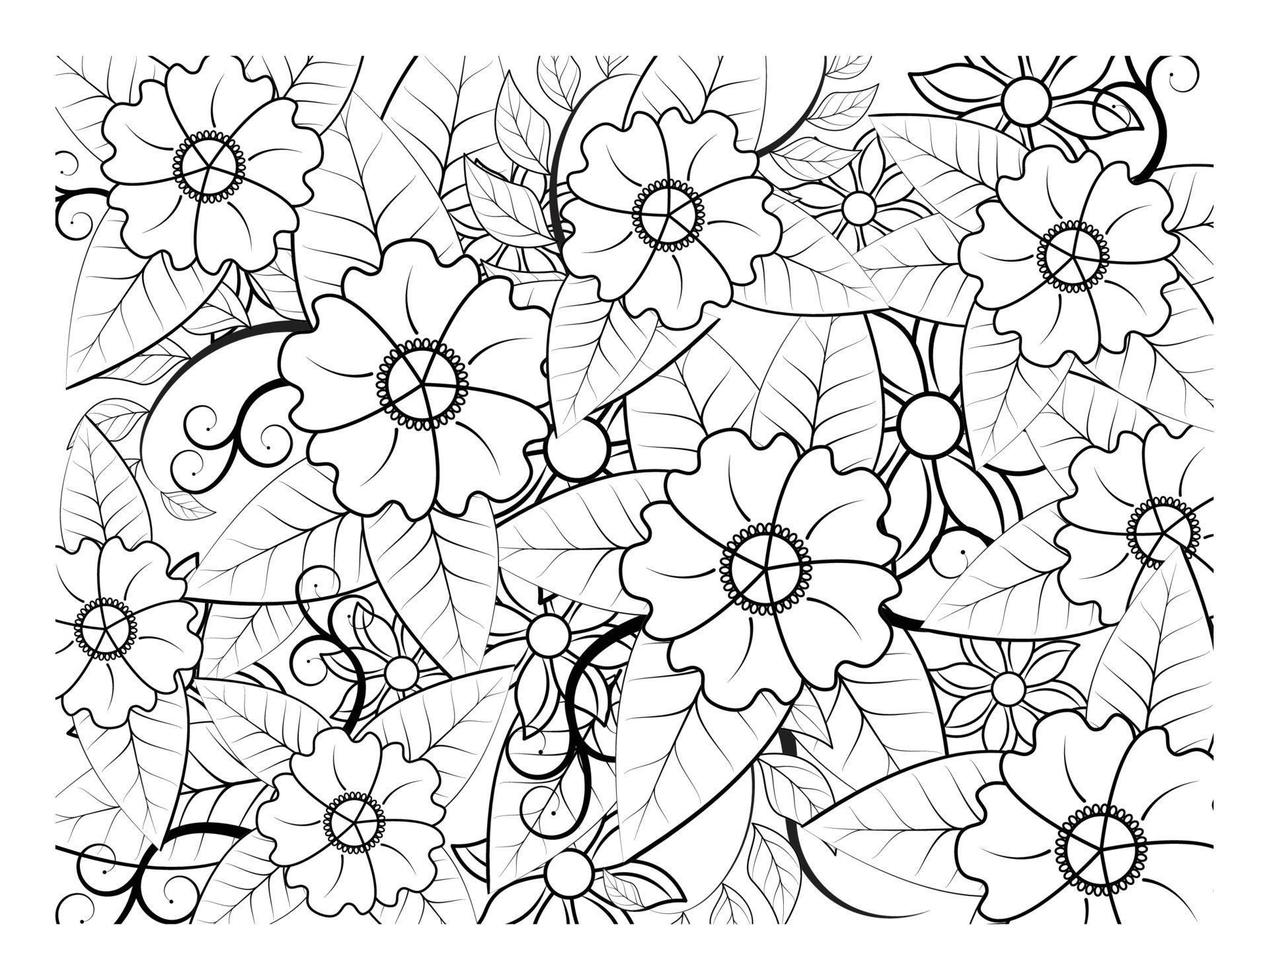 Coloring book for adult and older children. Coloring page with flowers pattern fram vector